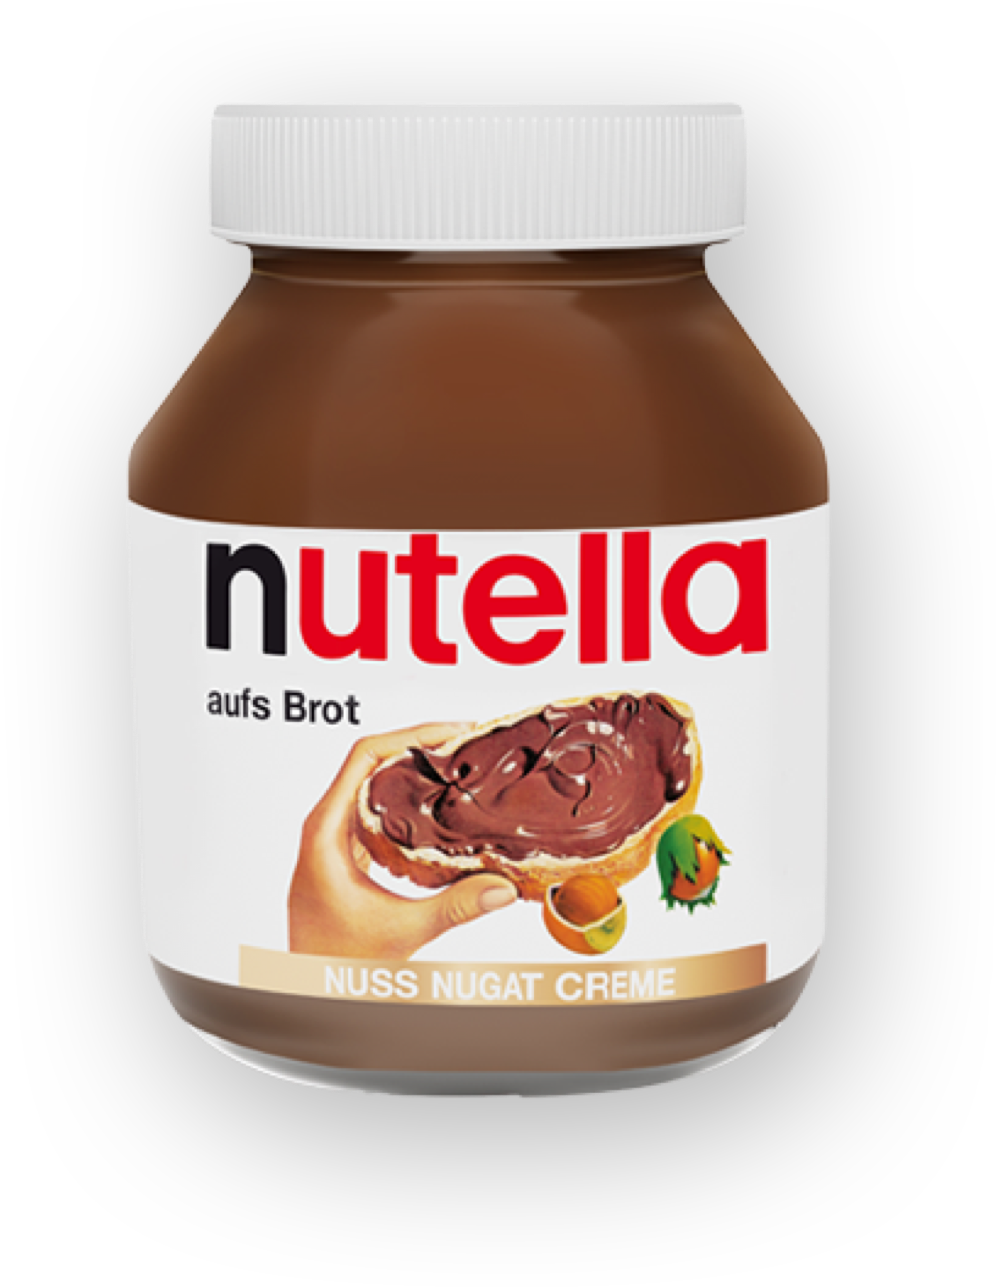 Our Heritage, Nutella®